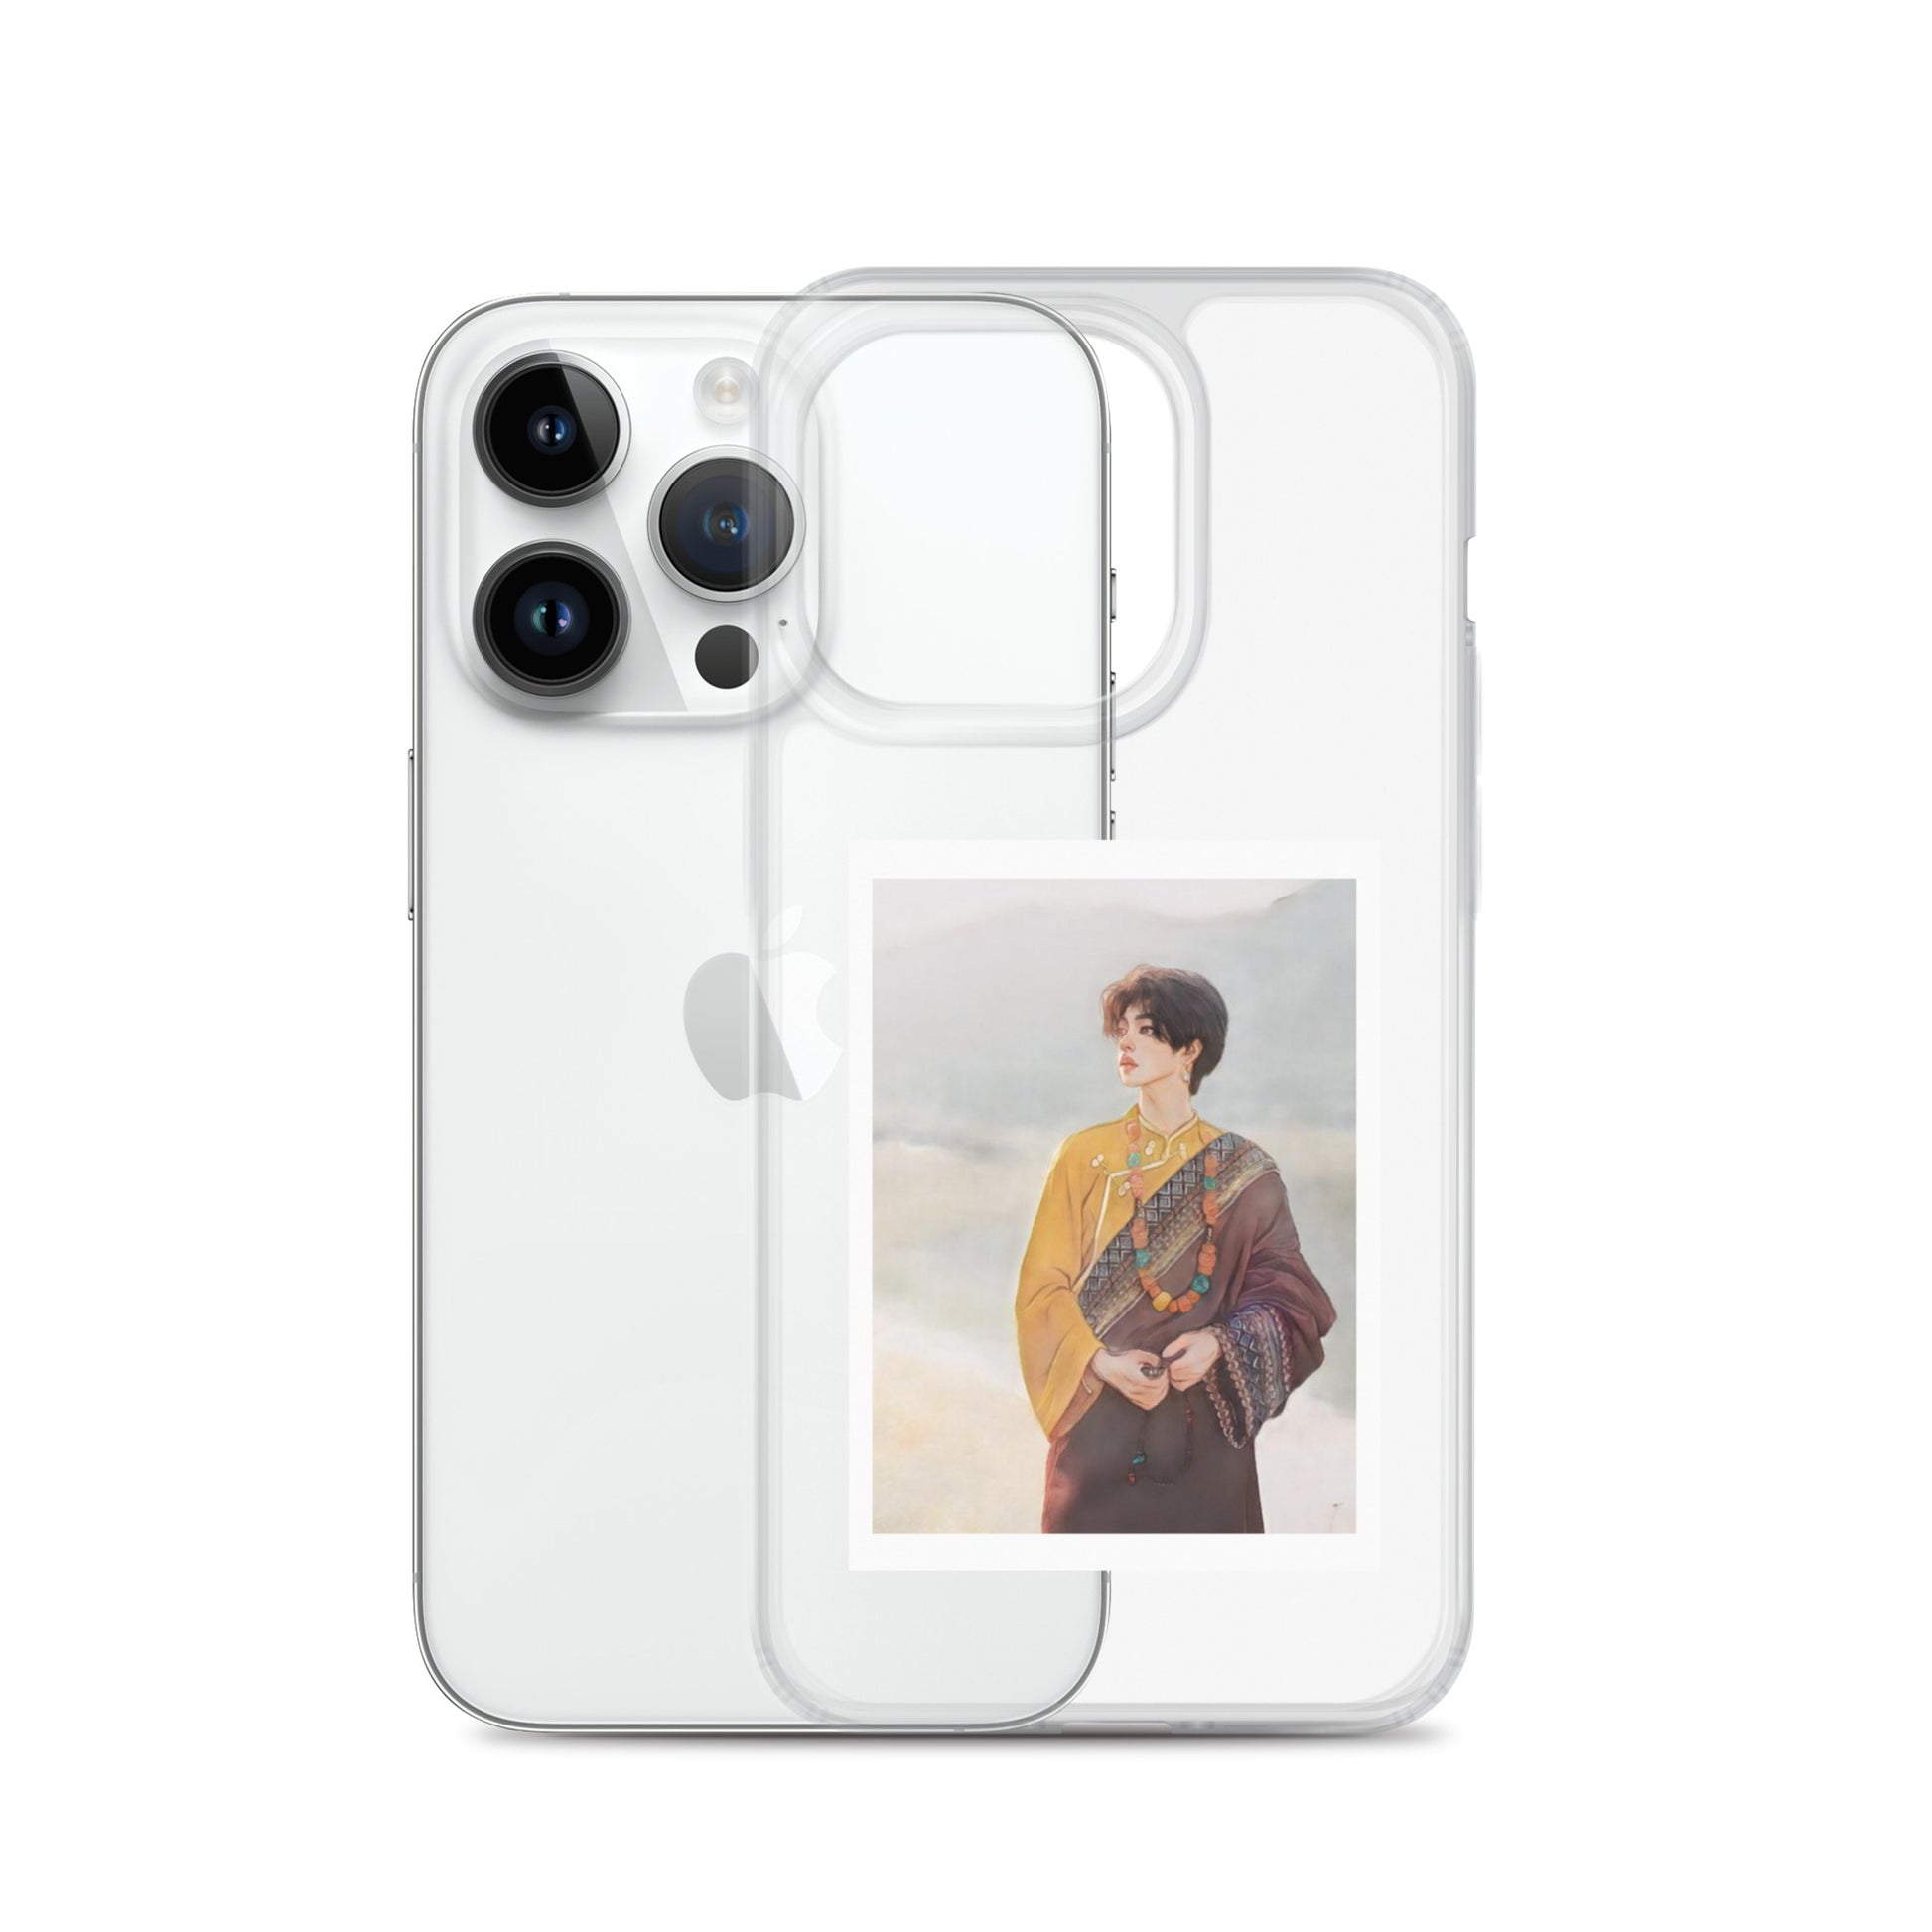 TIBETAN BOY iPhone Case is designed under Dzimig Studios Tibetan Archive Project. This sleek iPhone® case protects your phone from scratches, dust, oil, and dirt.